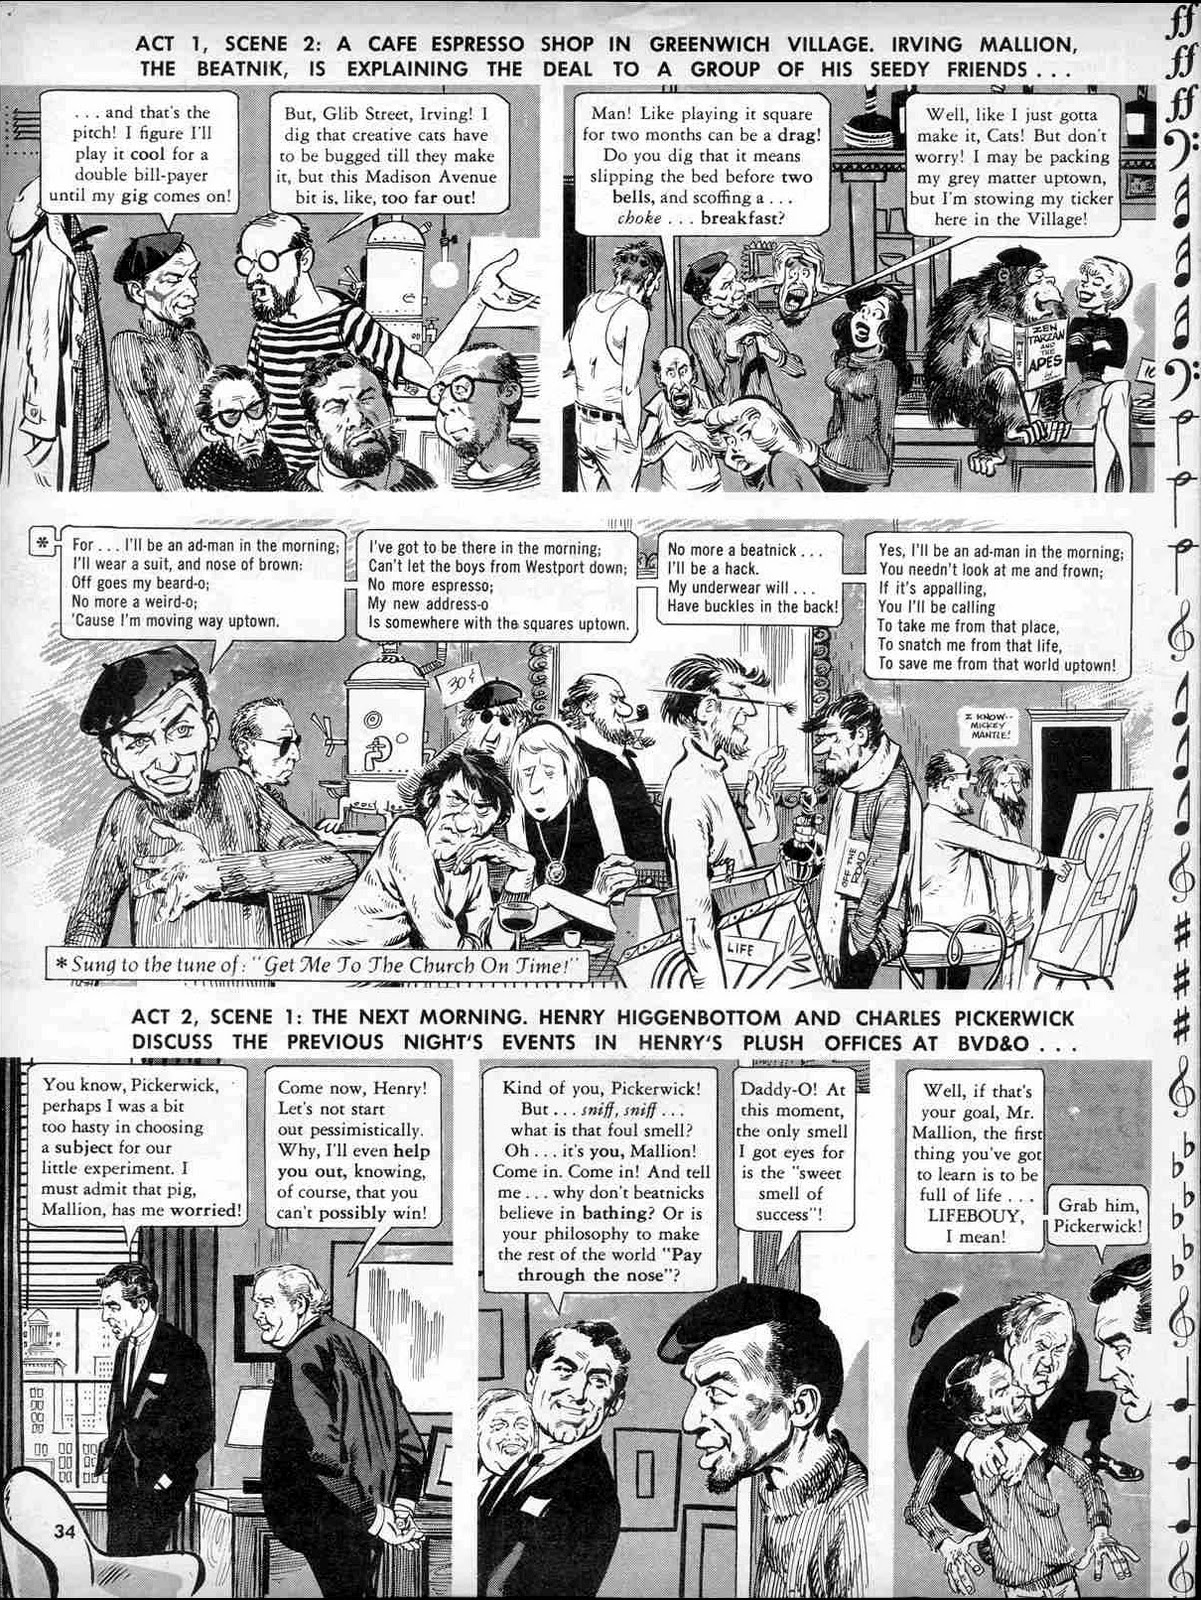 Out Of This World: Beatniks in Comics: A Sampler, Part 3